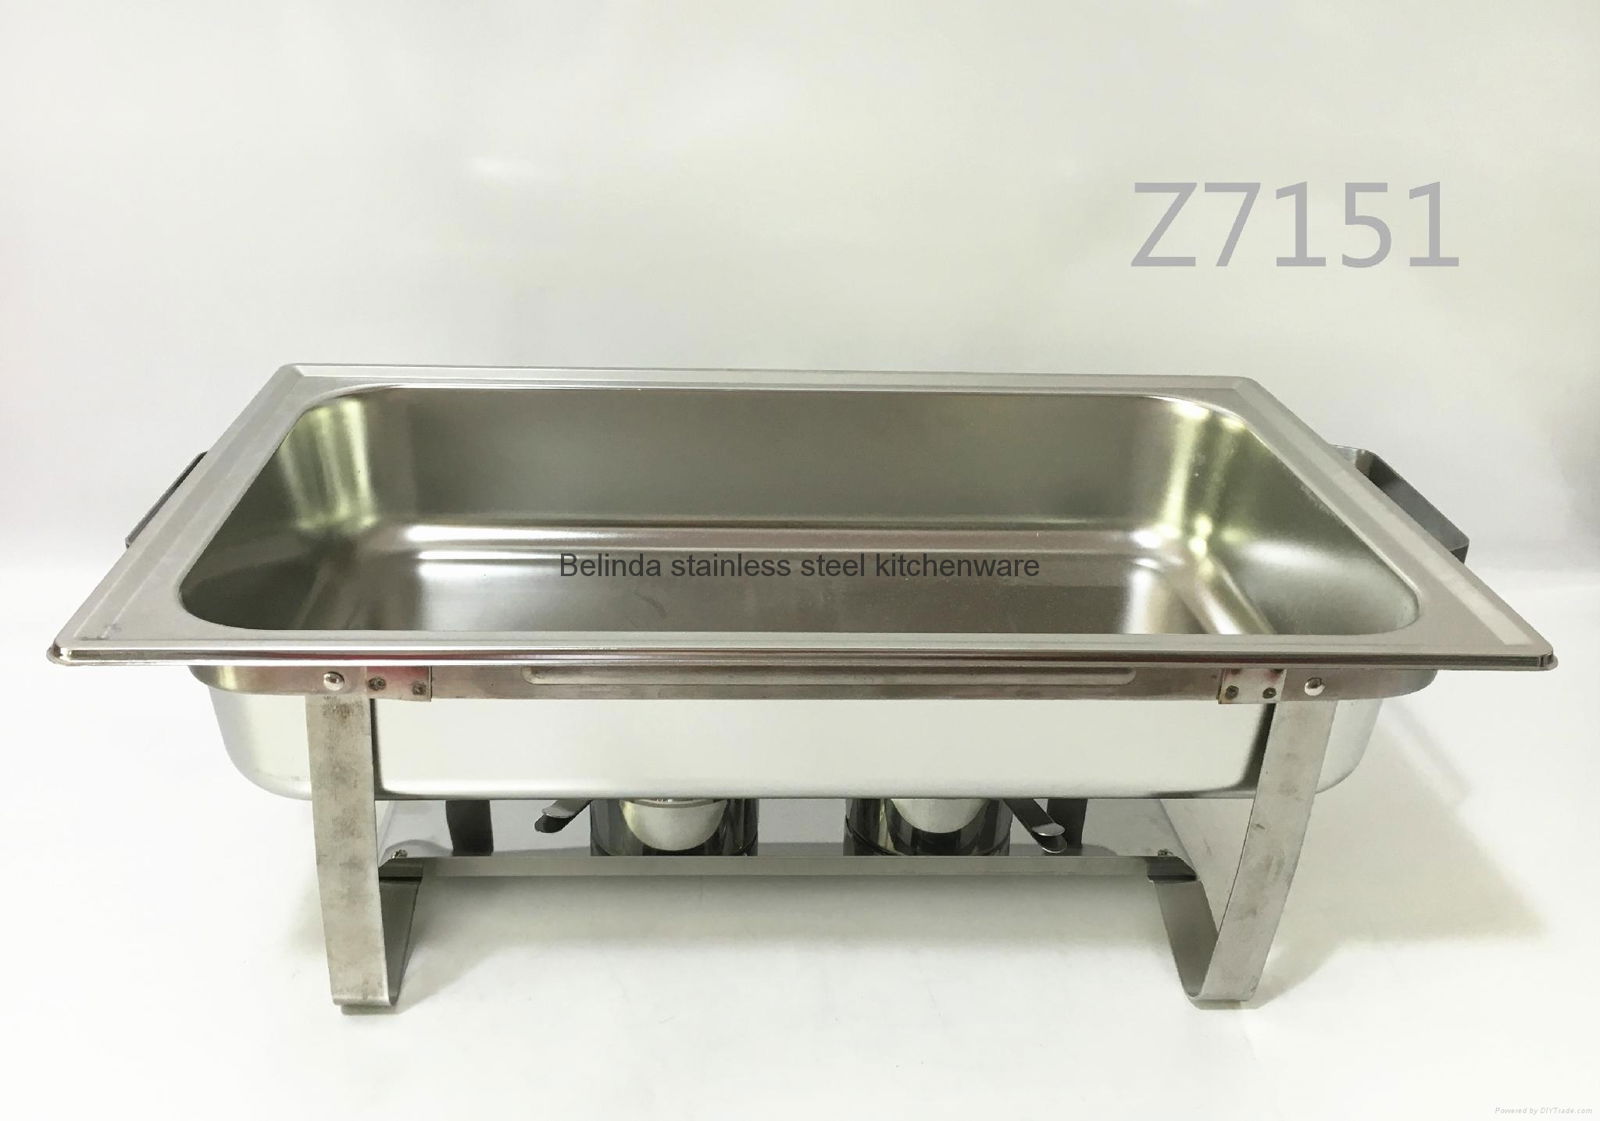 9liter Economic Stainless Steel Chafing Dish with Double Food Pans 4